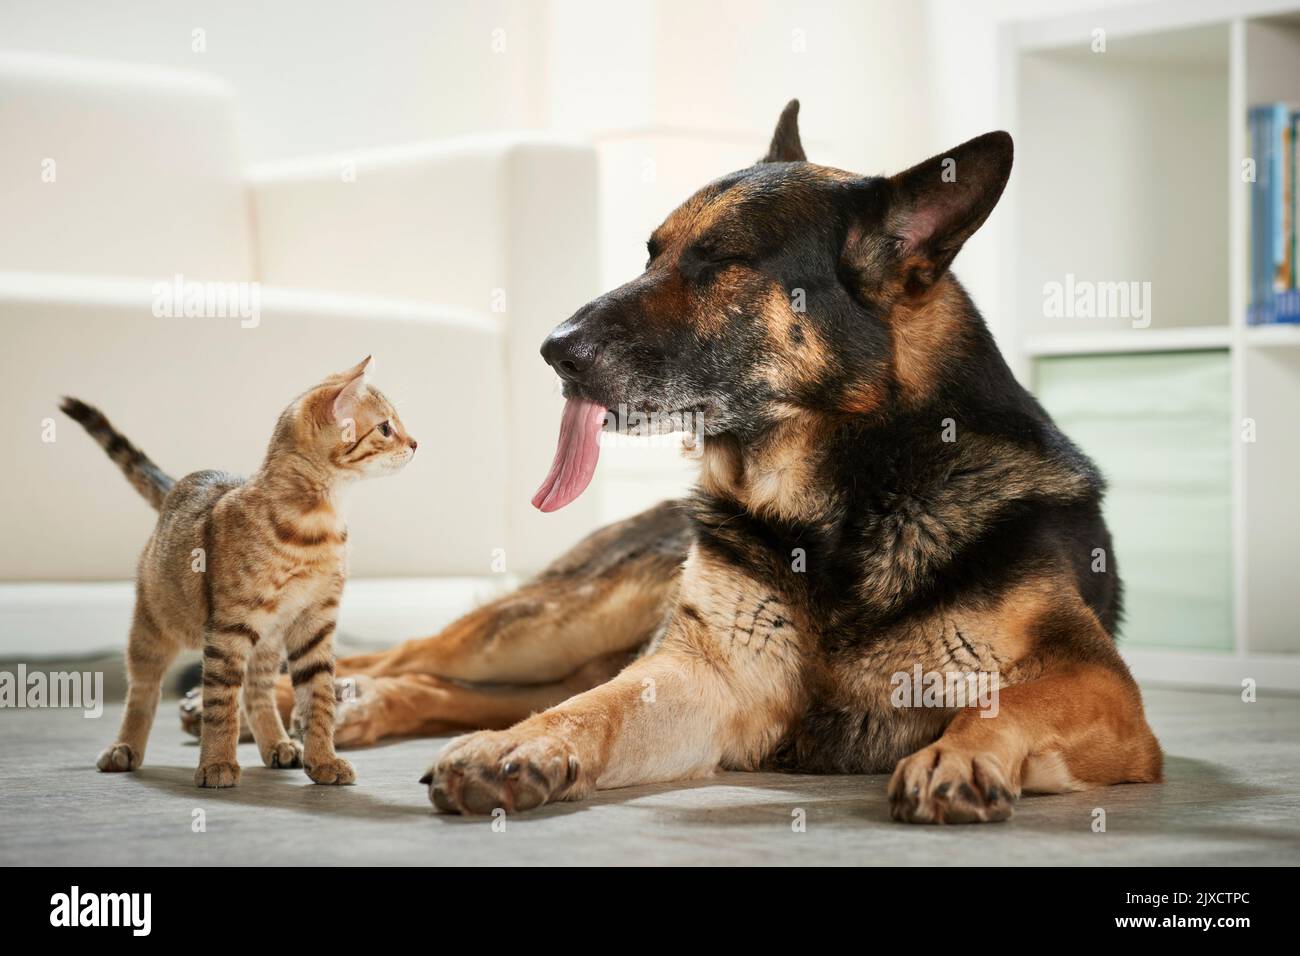 Domestic cat. A kitten marvels at the tongue of an adult German Shepherd dog. Germany Stock Photo